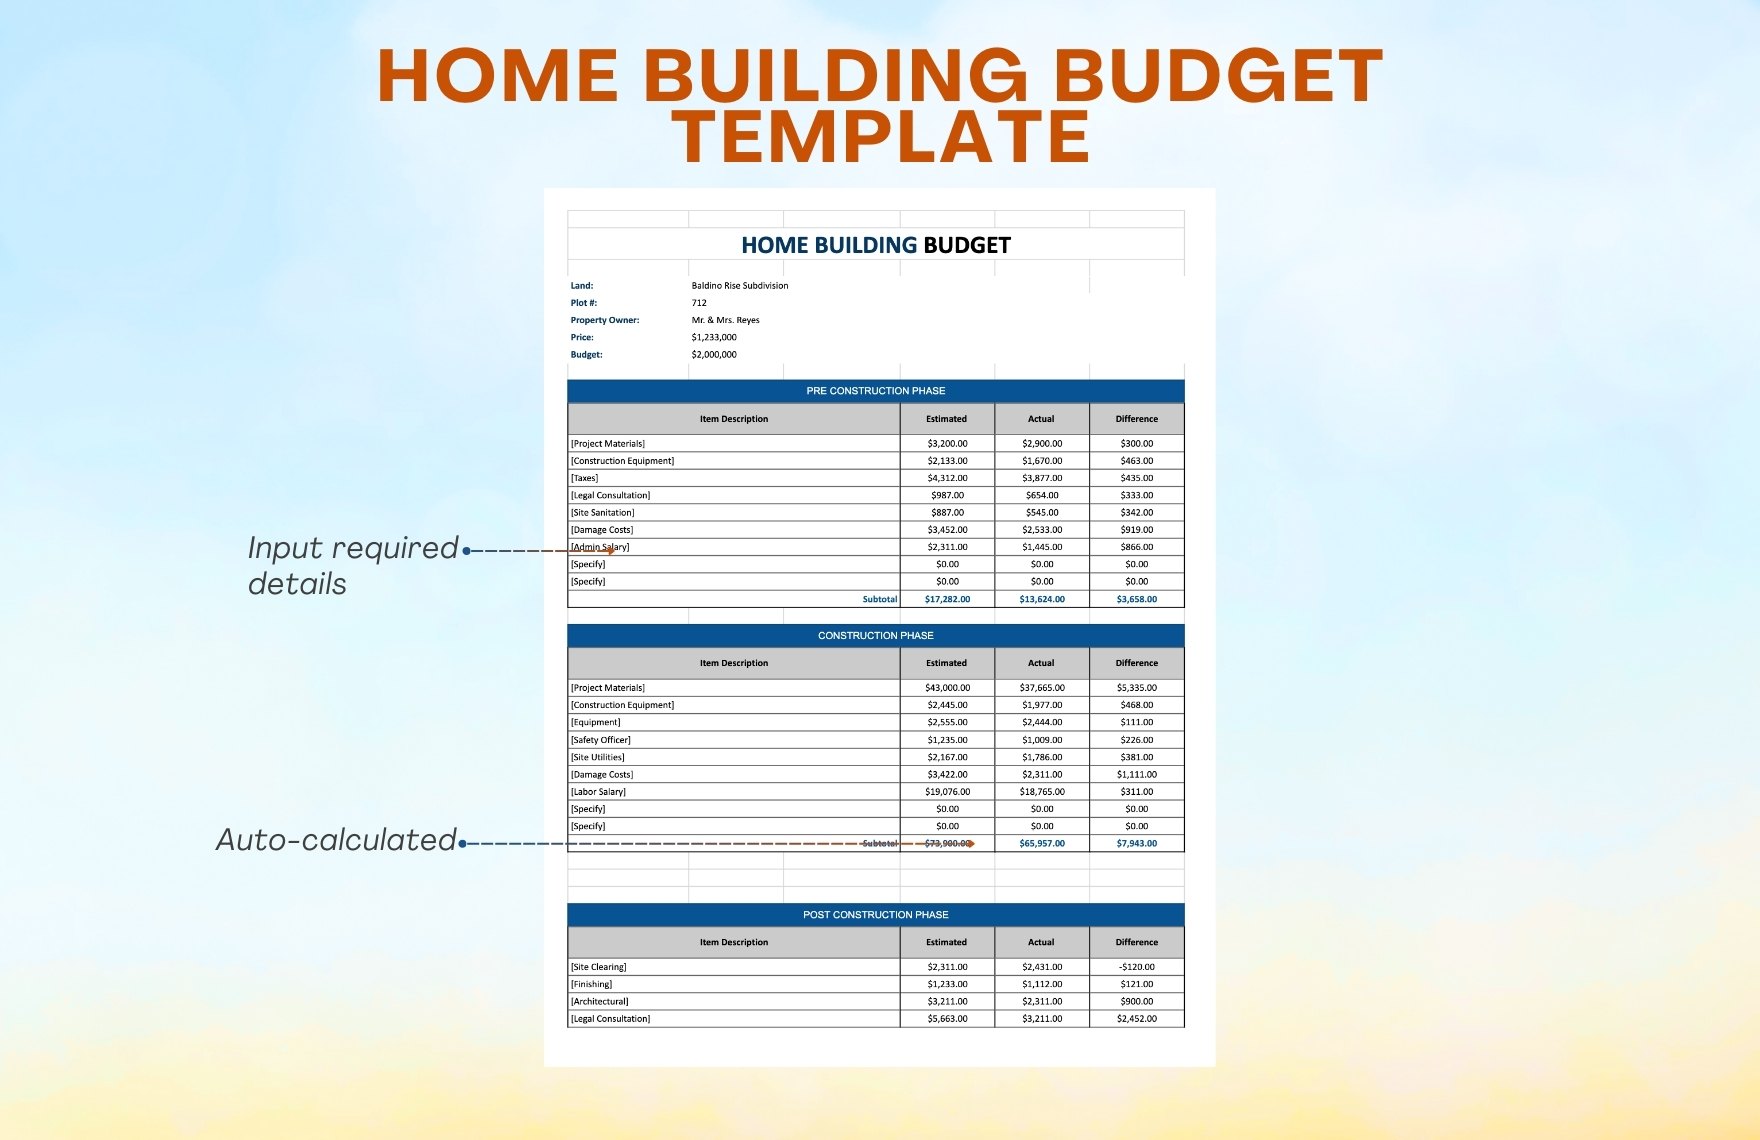 Home Building Budget Template